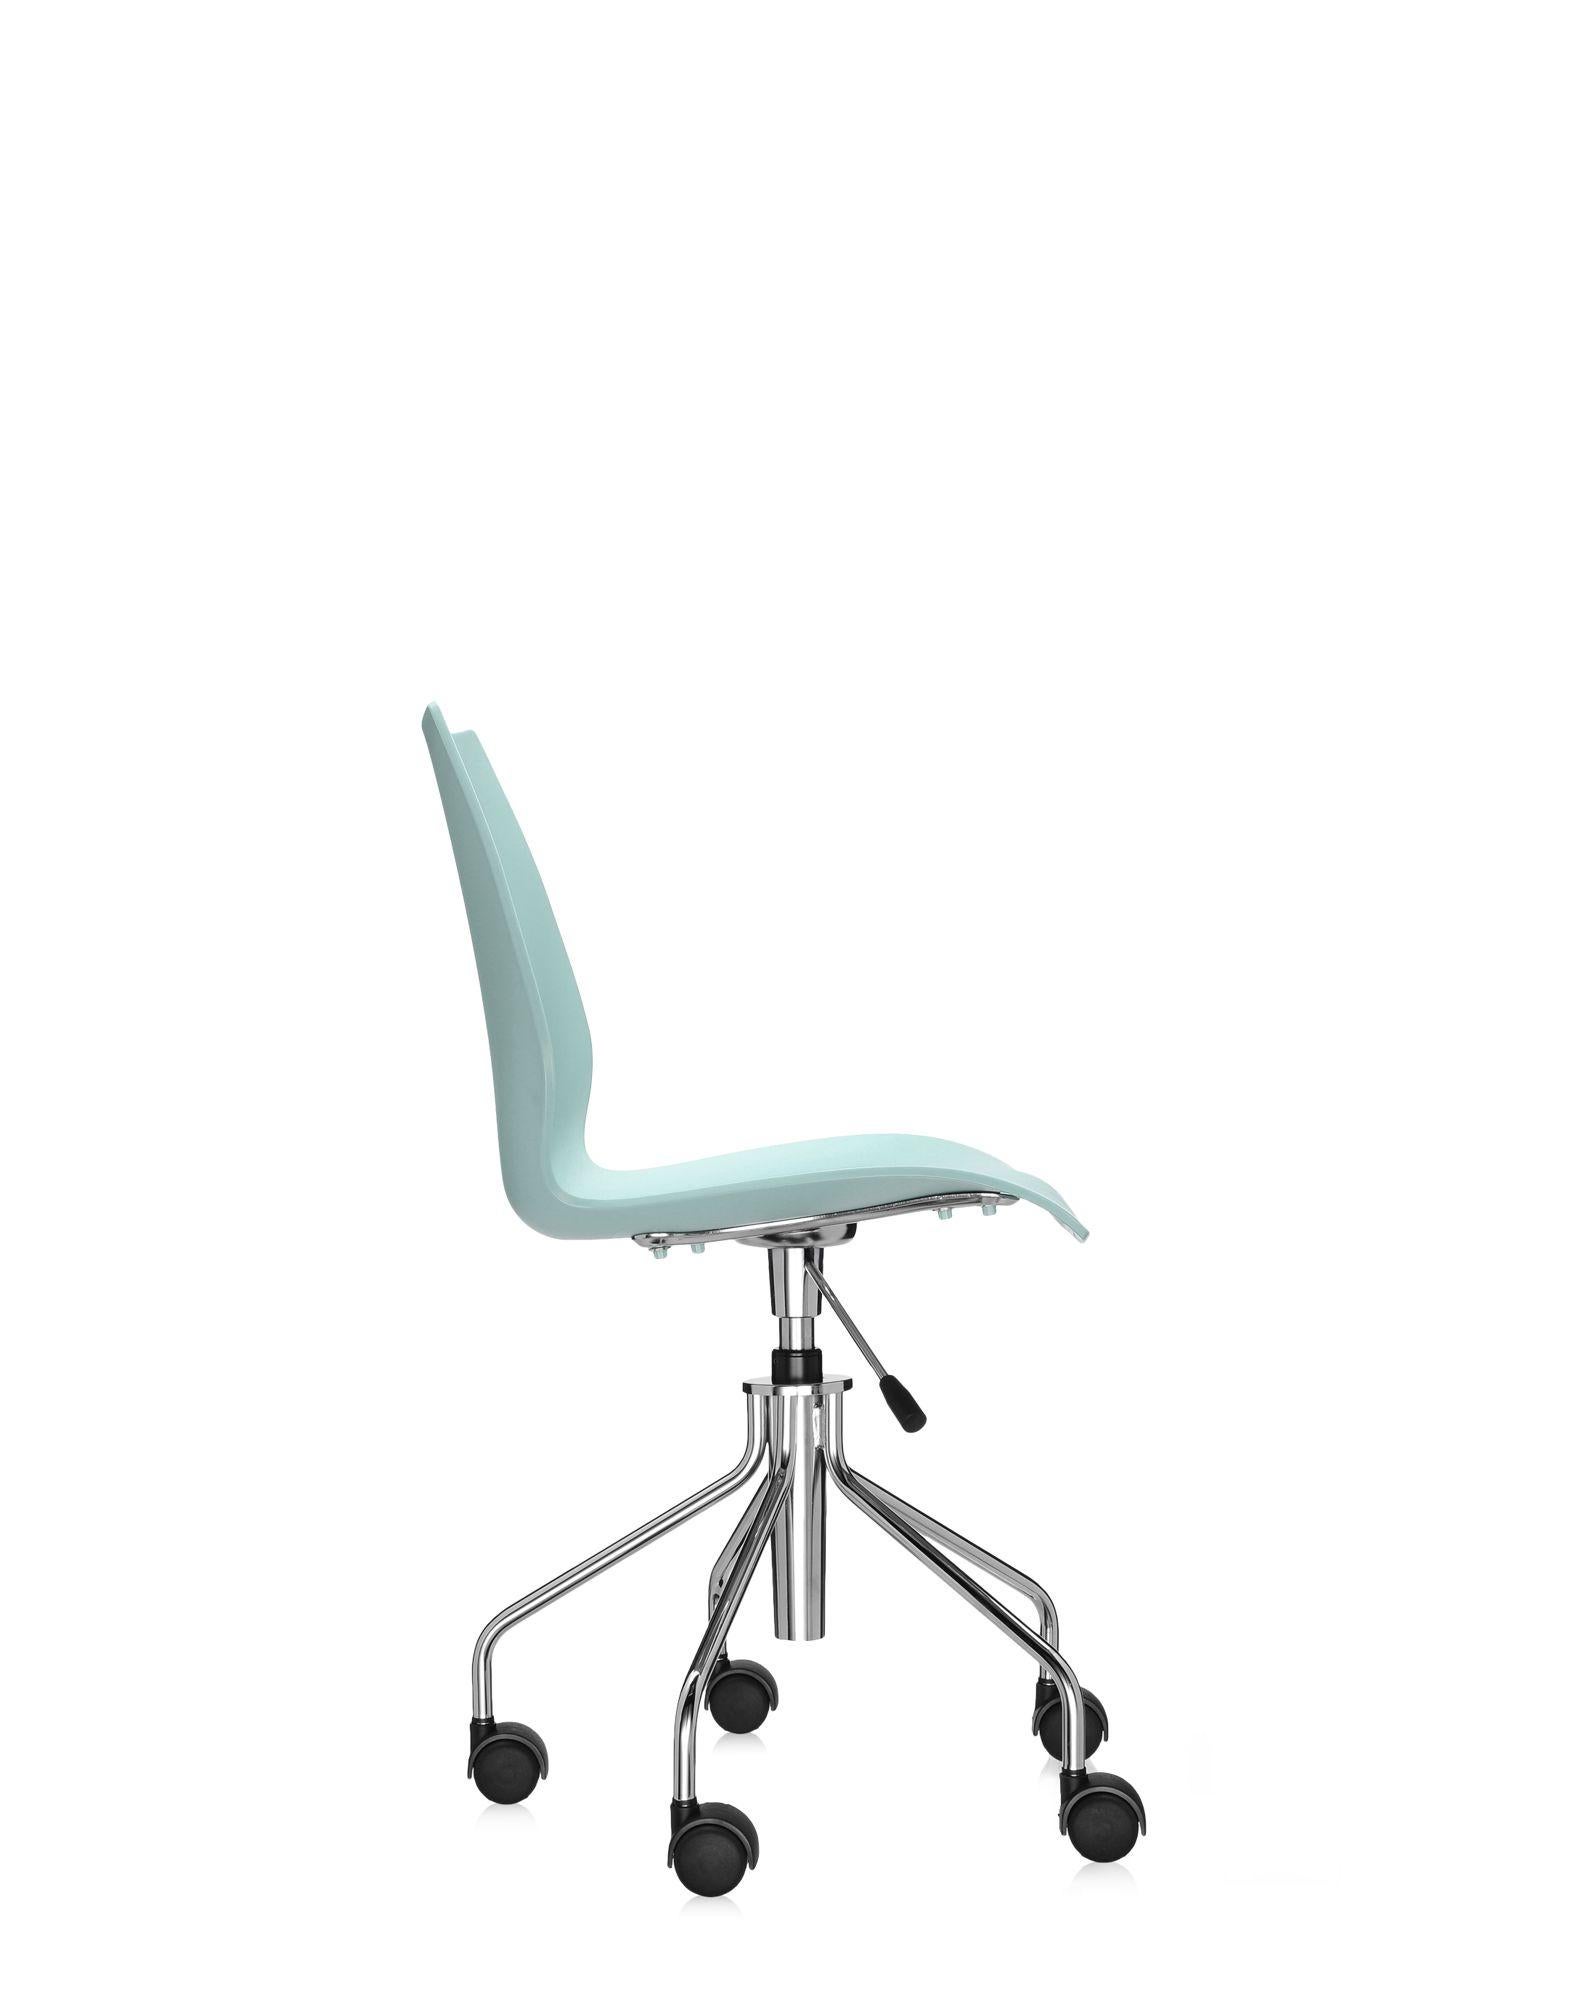 Contemporary Kartell Maui Swivel Chair Adjustable in Pale Blue by Vico Magistretti